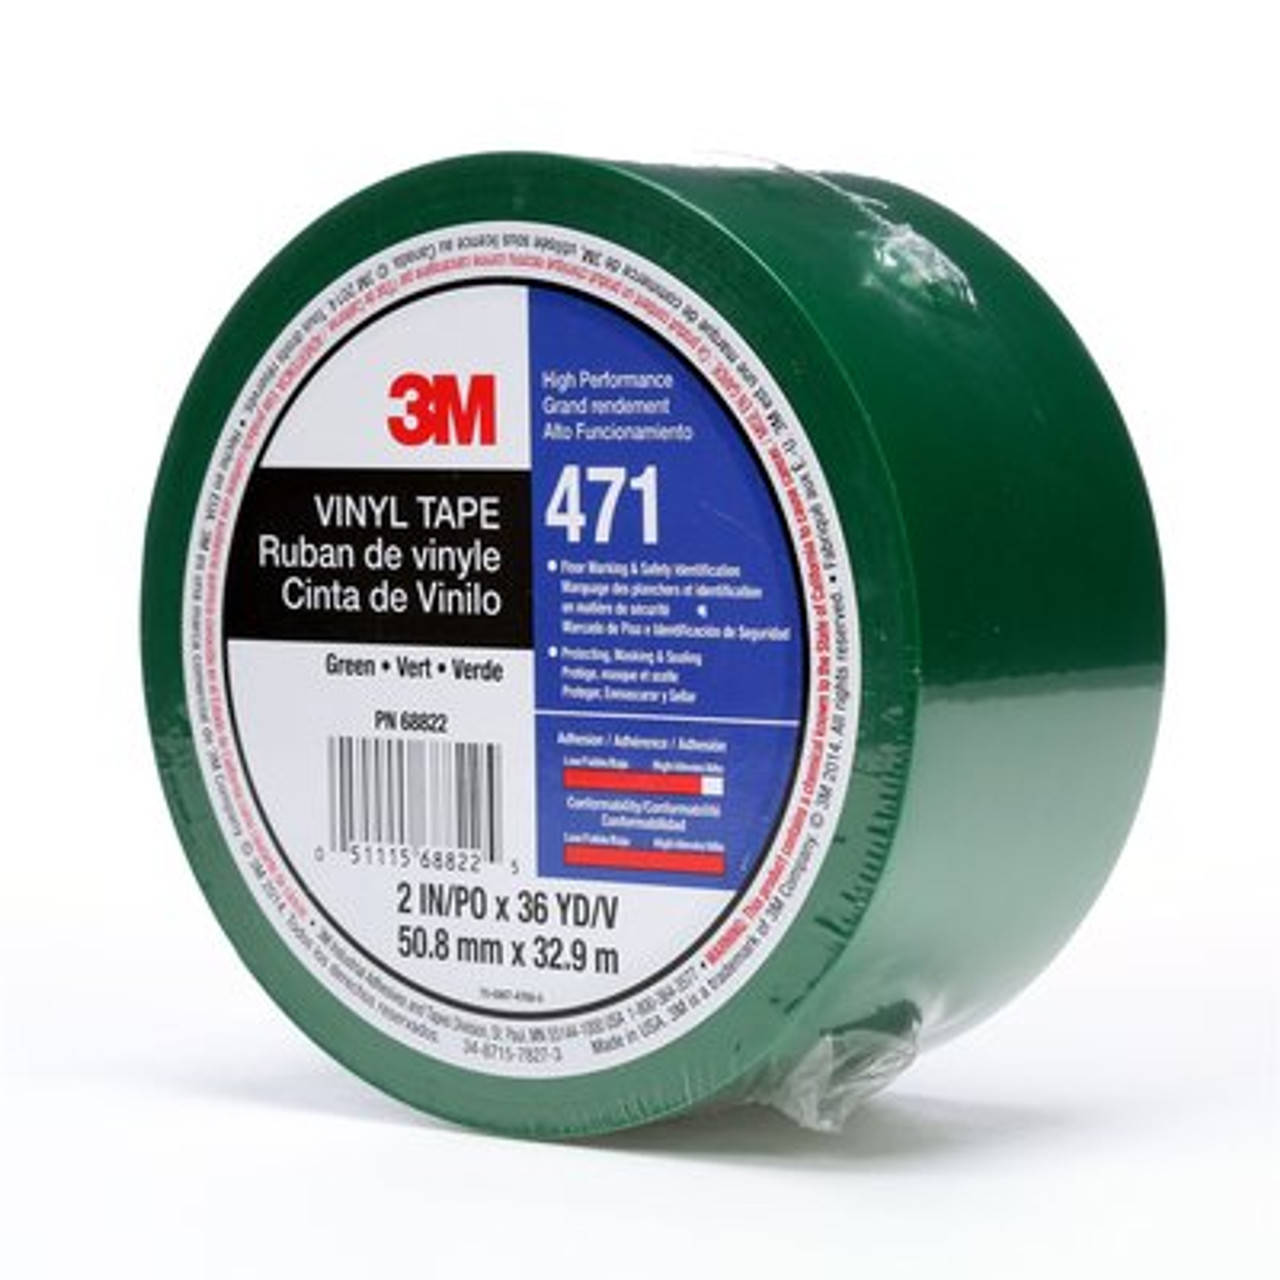 3M™ Vinyl Tape 471, Green, 2 in x 36 yd, 5.2 mil Individually wrapped